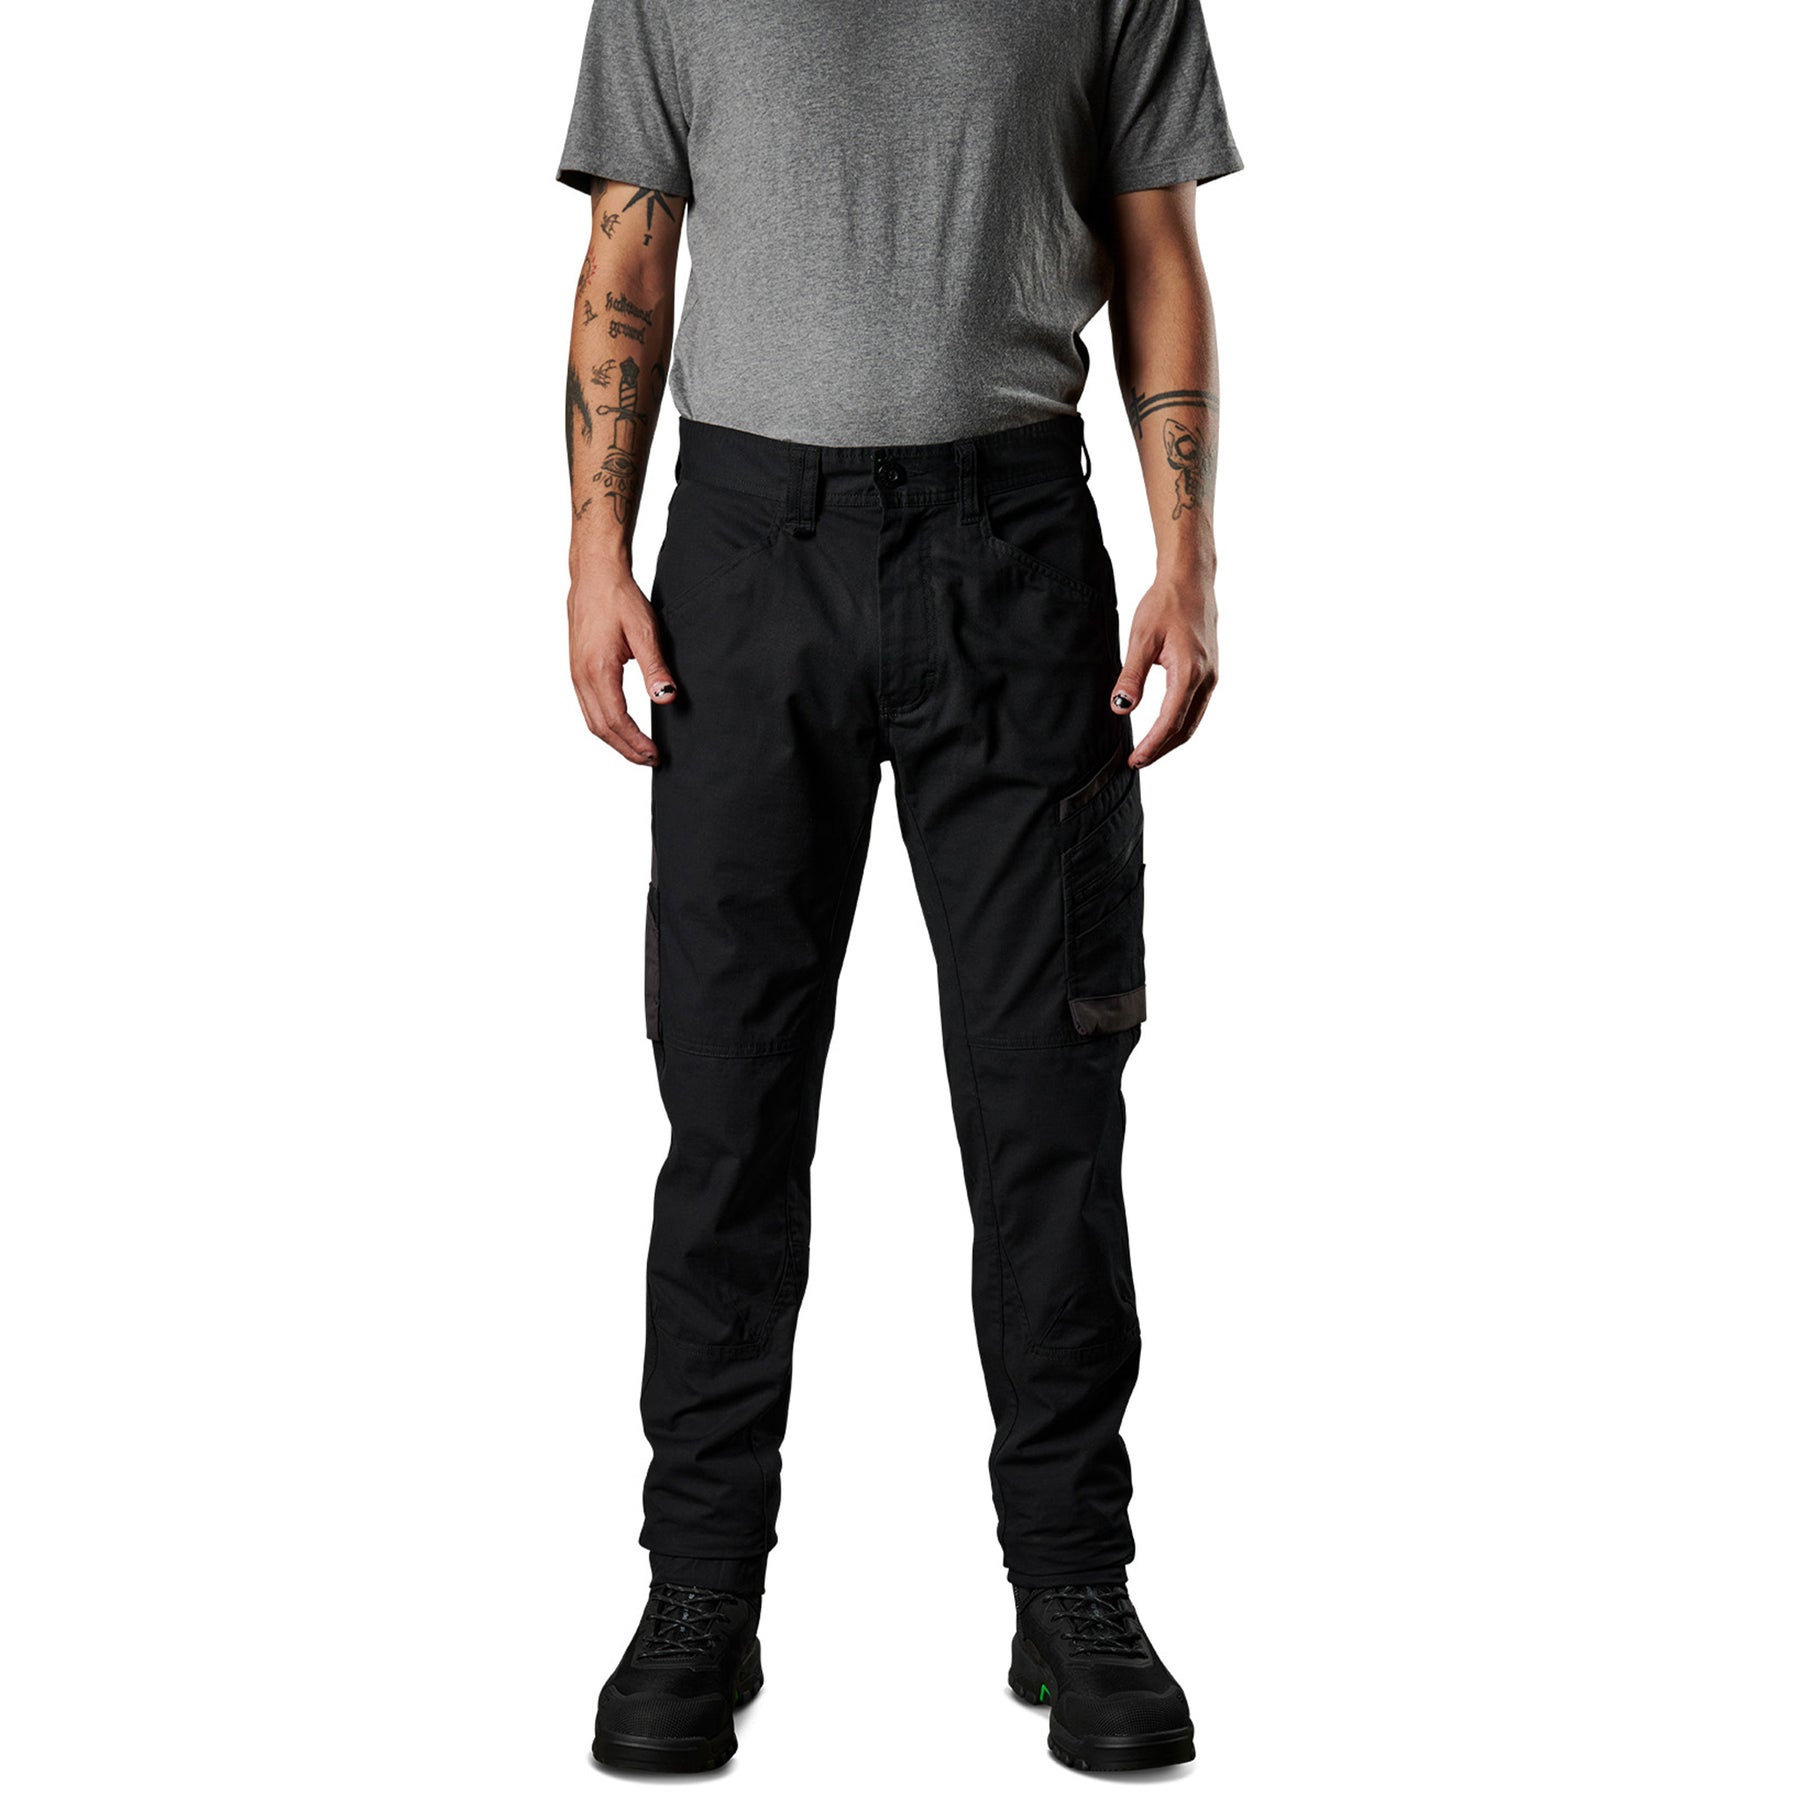 fxd cuffed stretch ripstop work pants in black